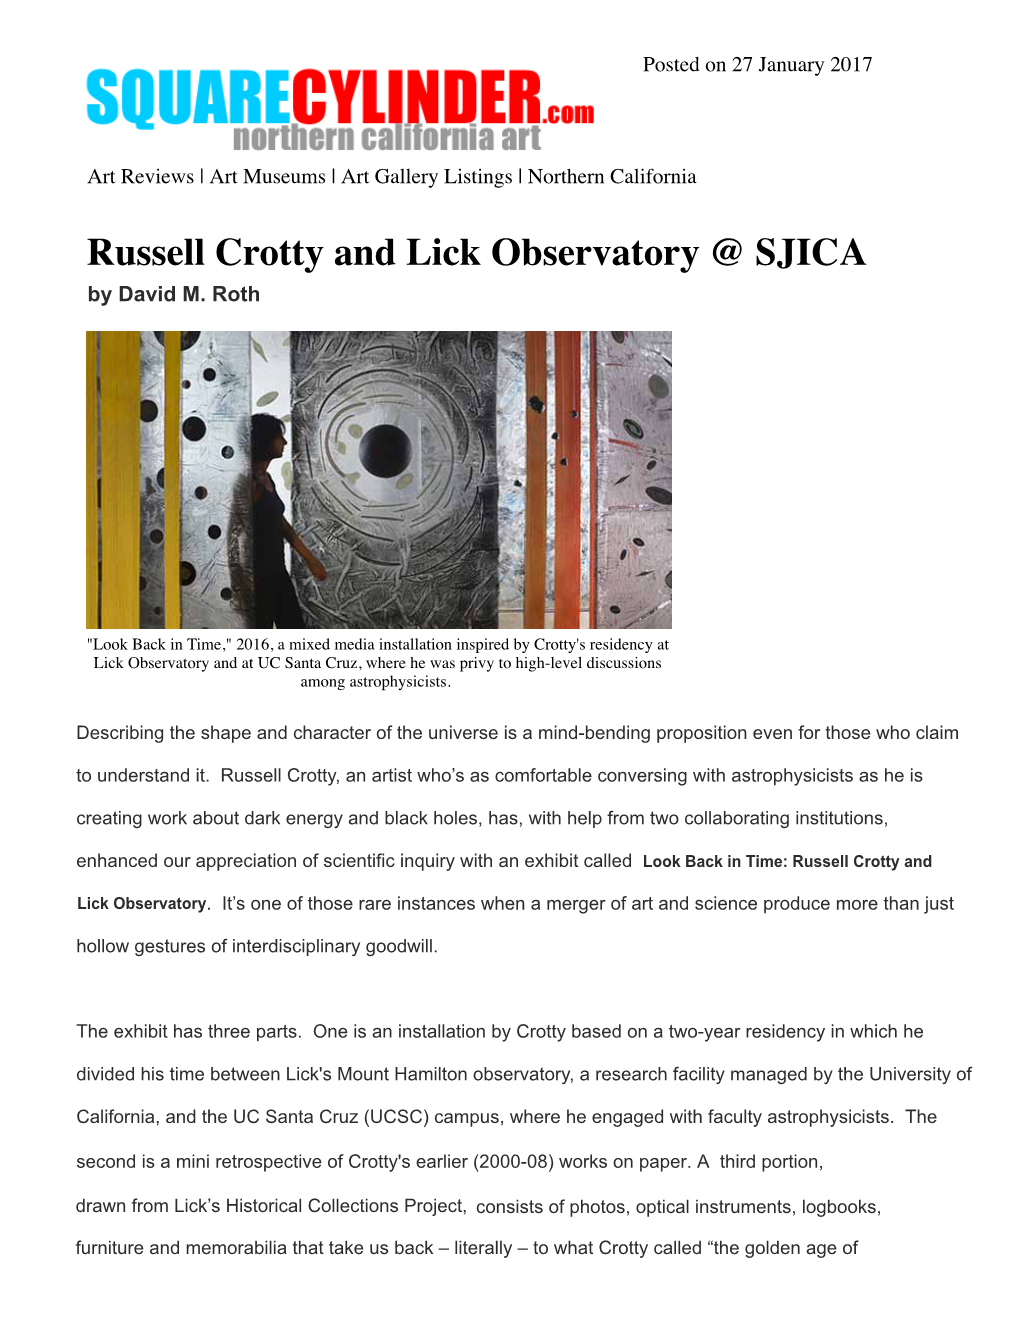 Russell Crotty and Lick Observatory @ SJICA | Squarecylinder.Com – Art